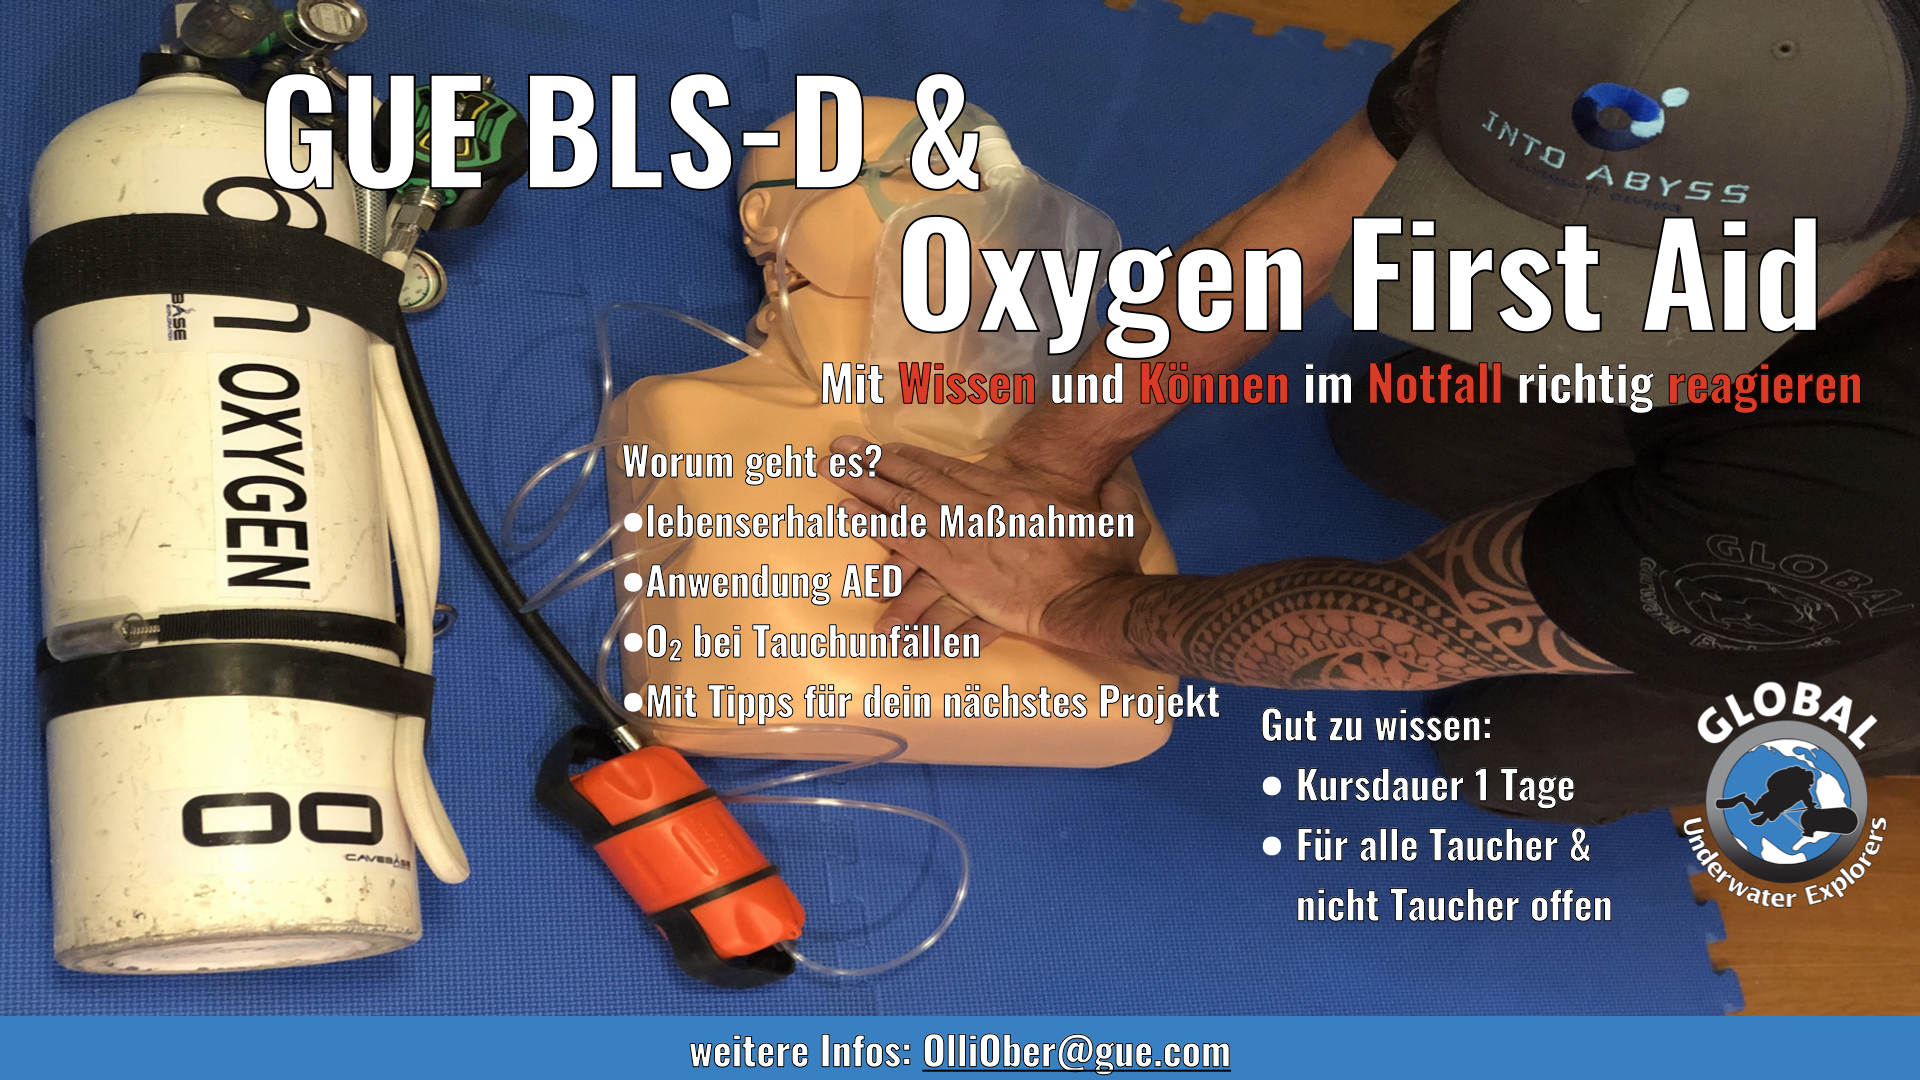 You are currently viewing GUE BLS-D & Oxygen First Aid